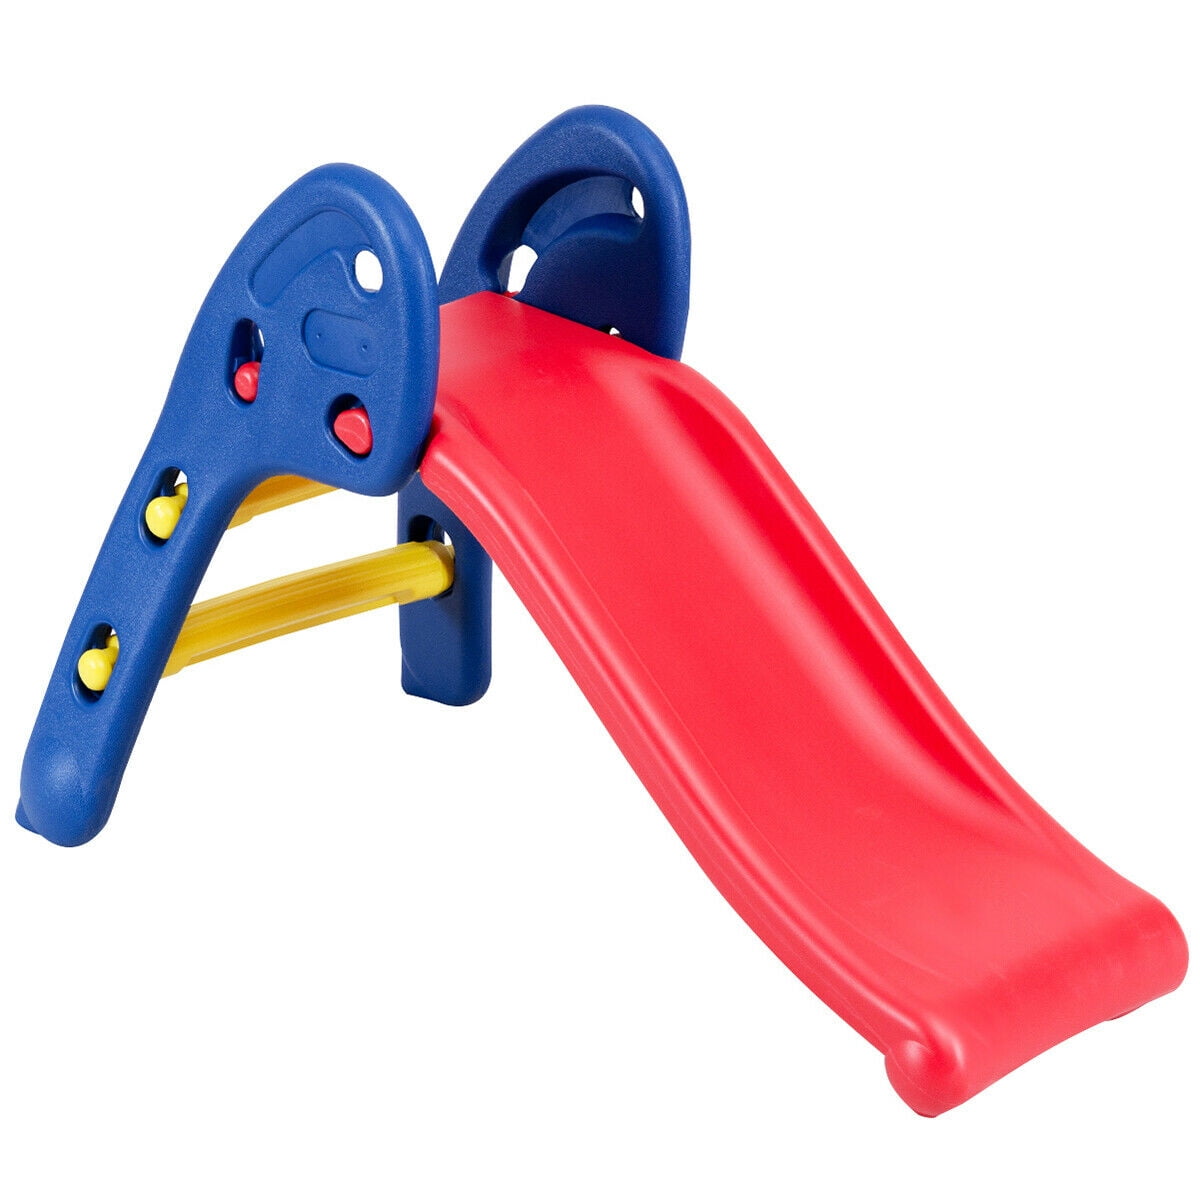 Kids Baby First Slide-Childrens Indoor Outdoor Activity-Gift Game Toys-Foldable 